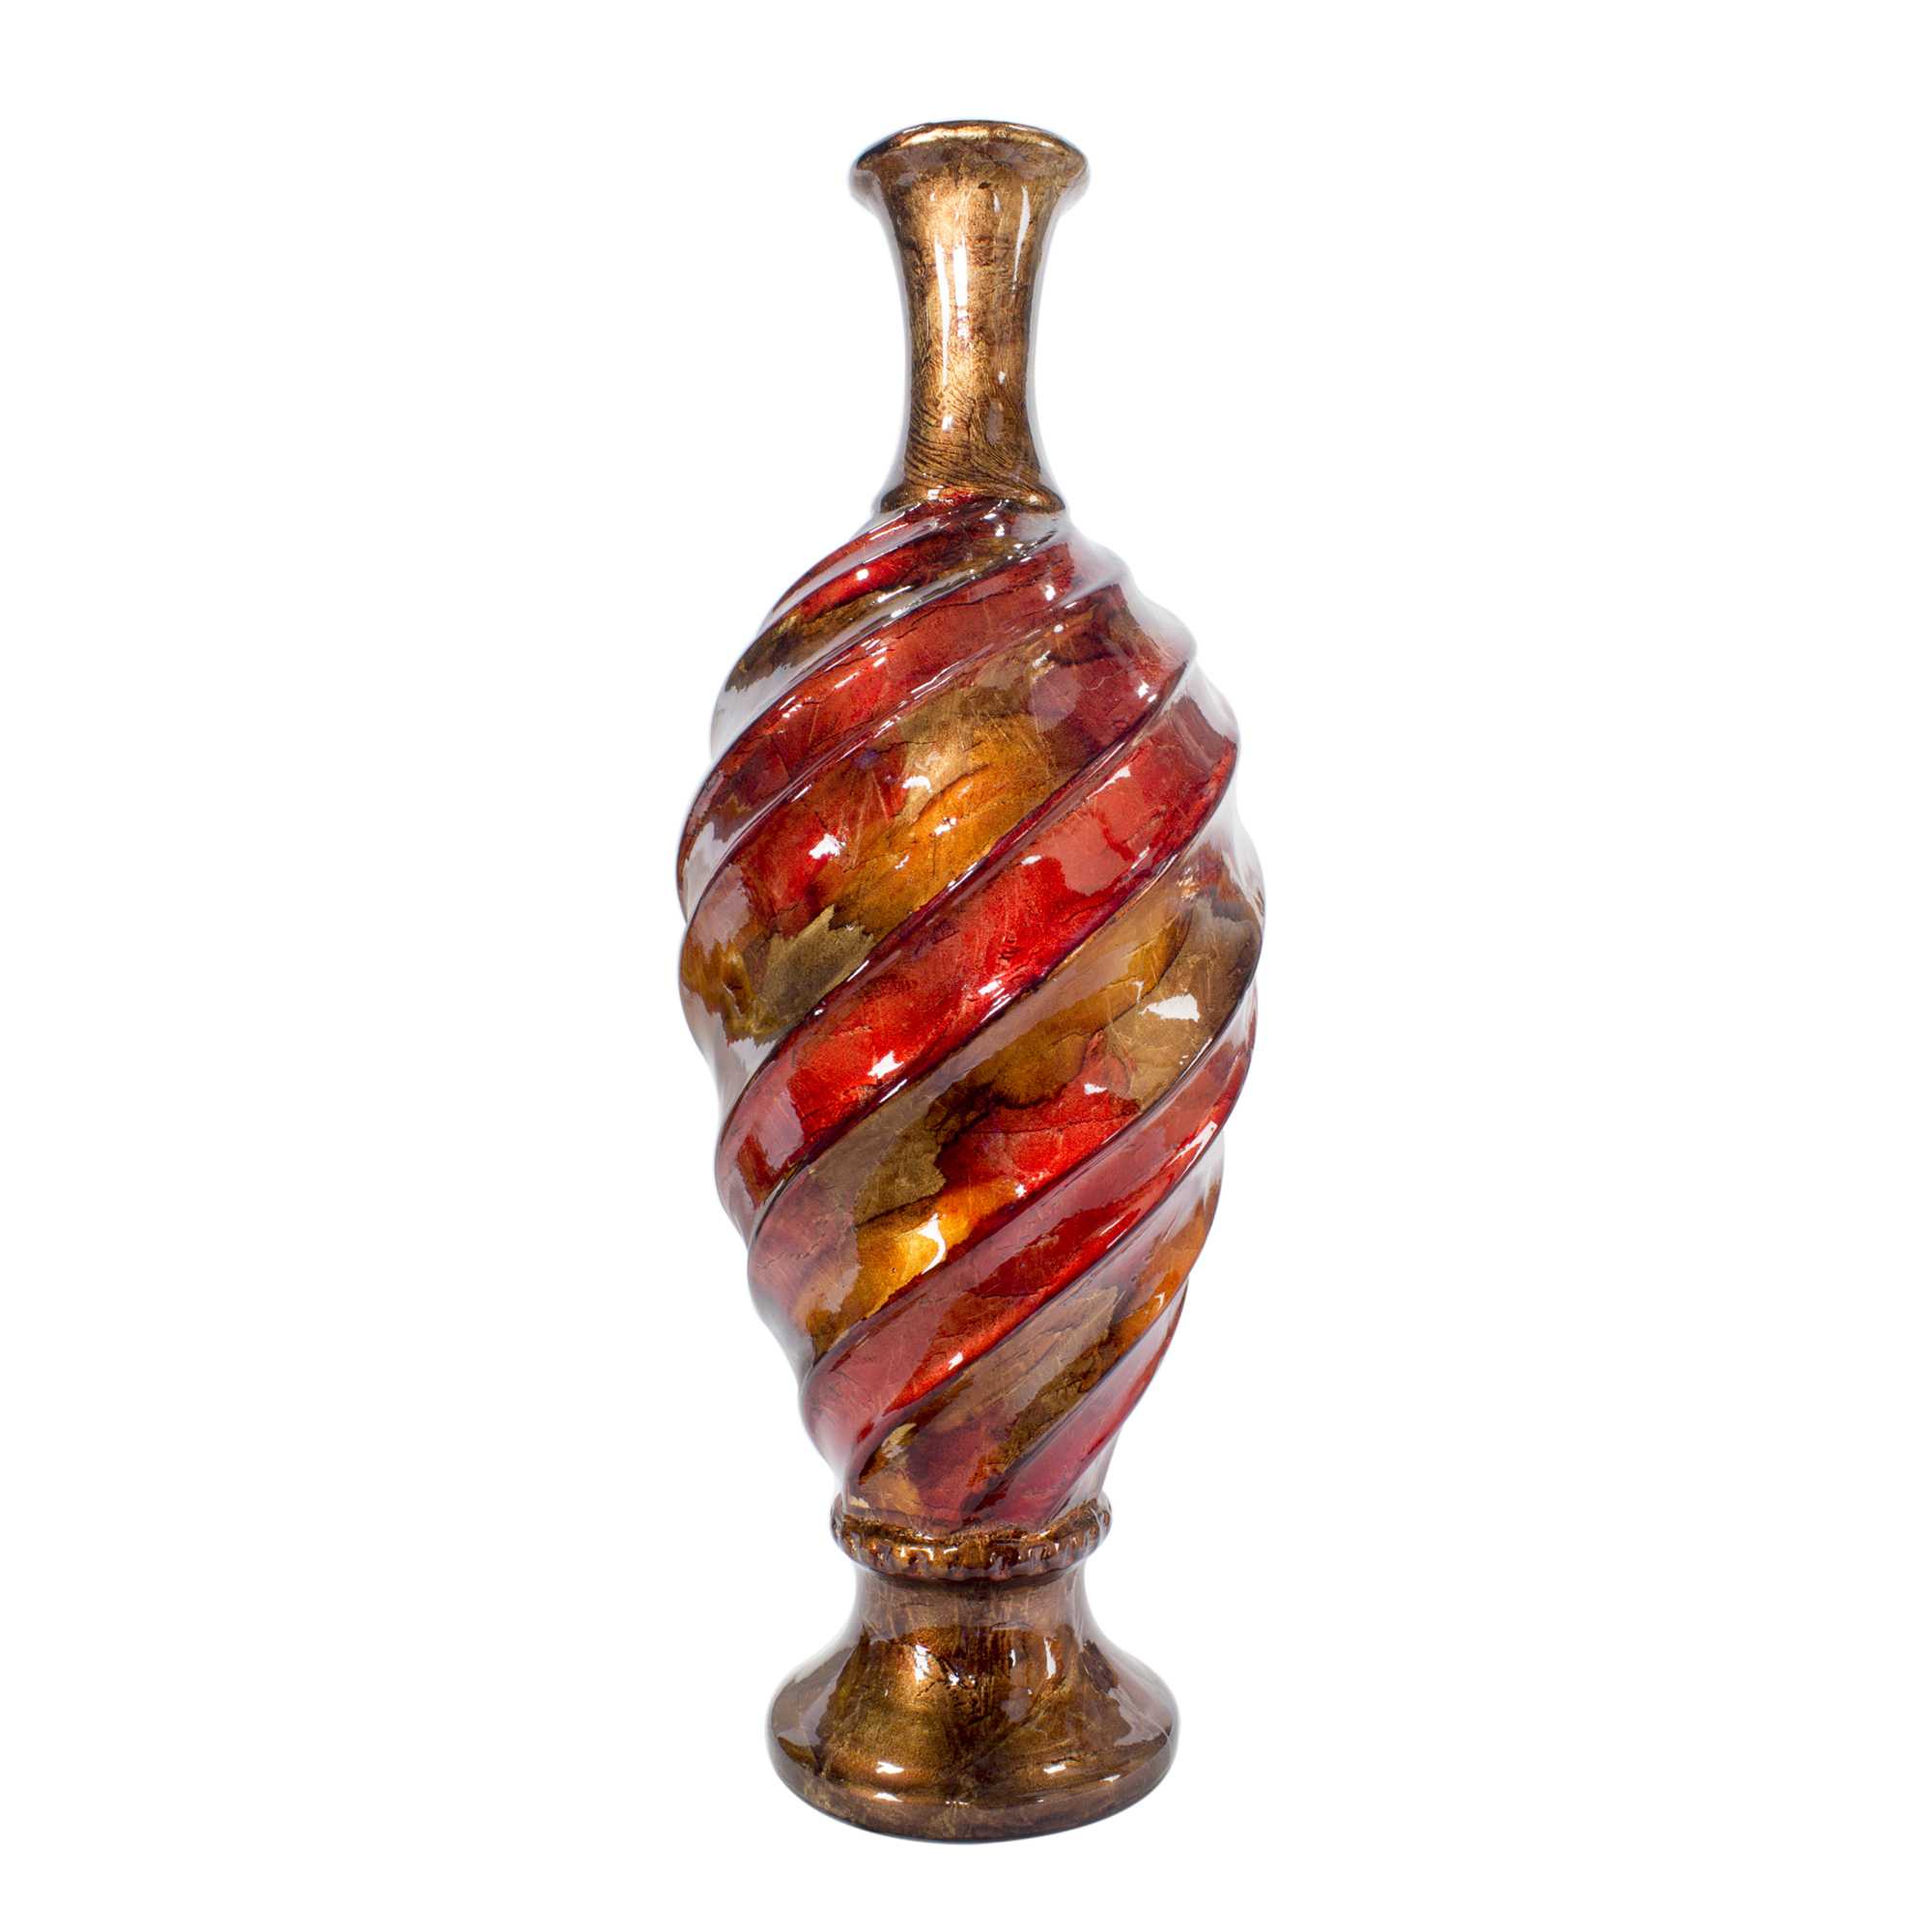 Swirl Copper Red and Gold Ceramic Foil and Lacquer Bud Vase